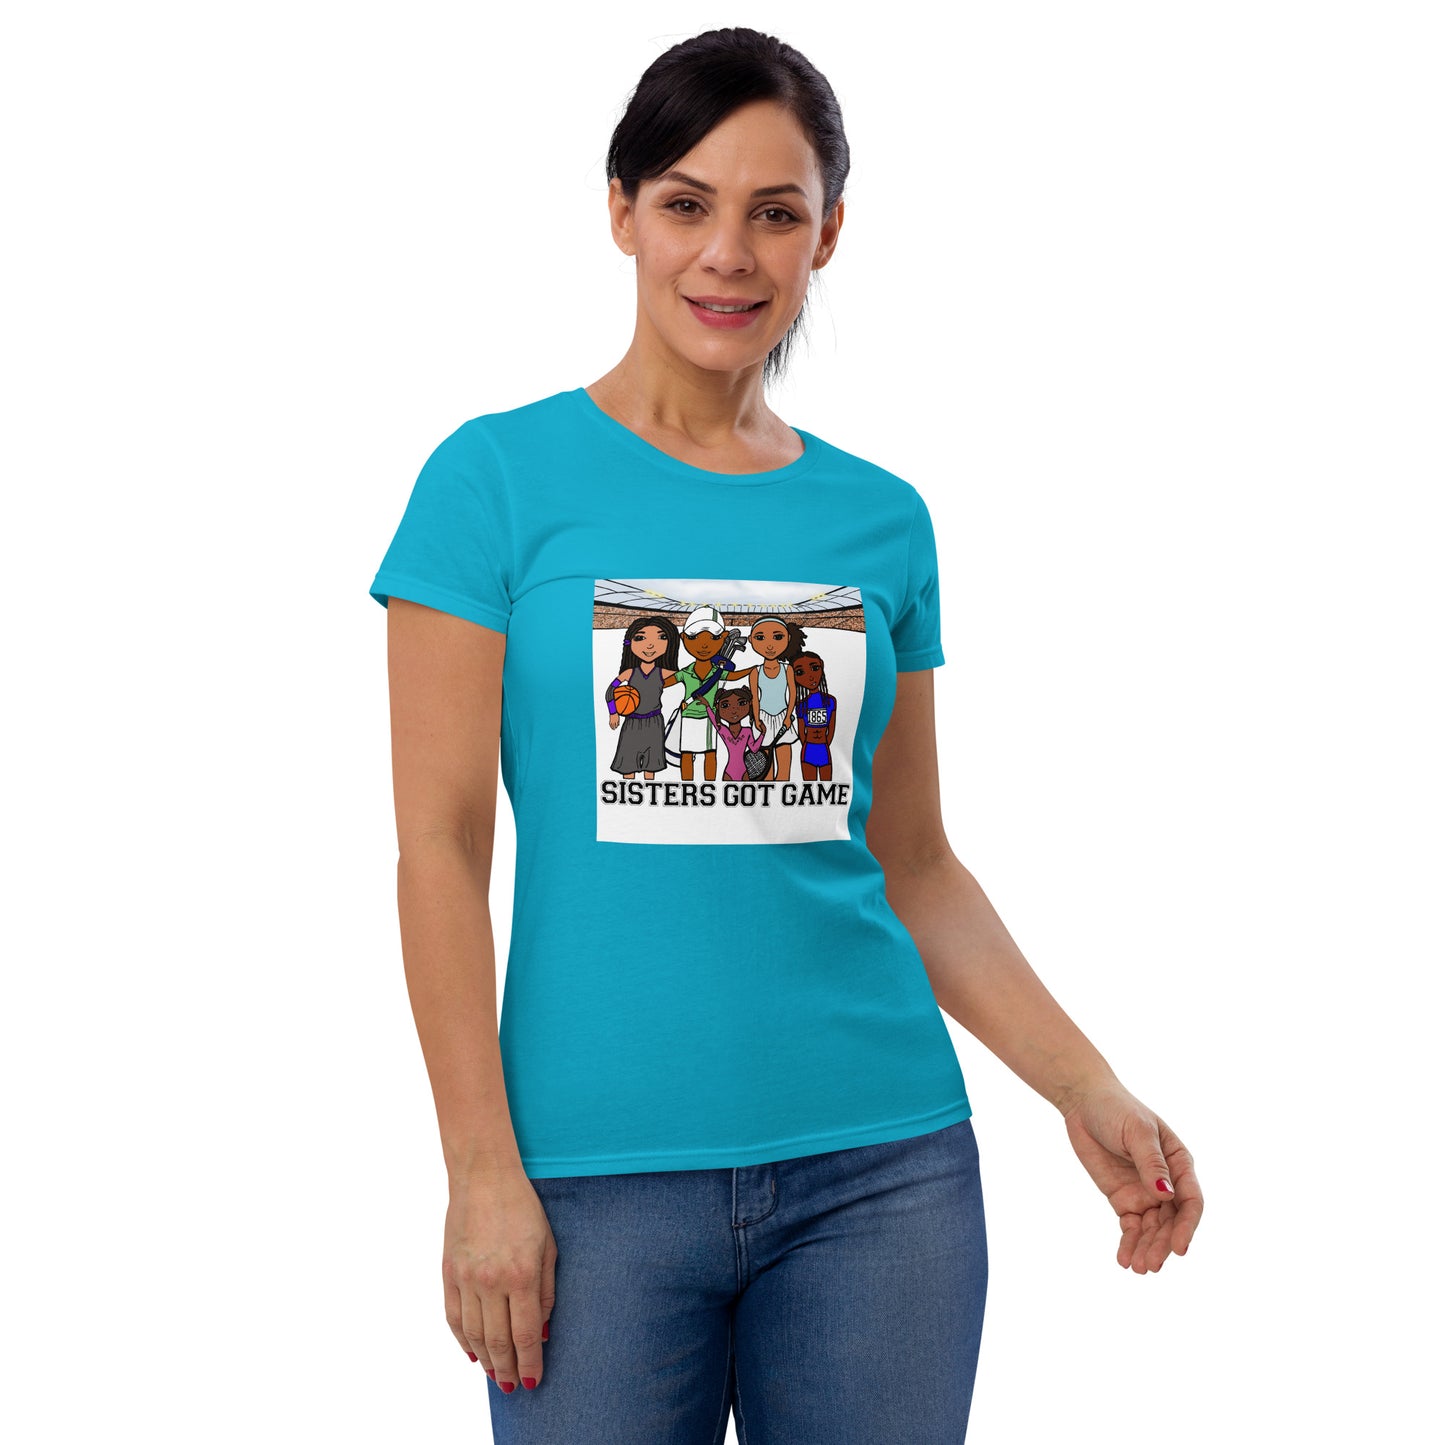 Sisters Got Game, Adult T-Shirt | Applauding the Dynamic Women of Sports